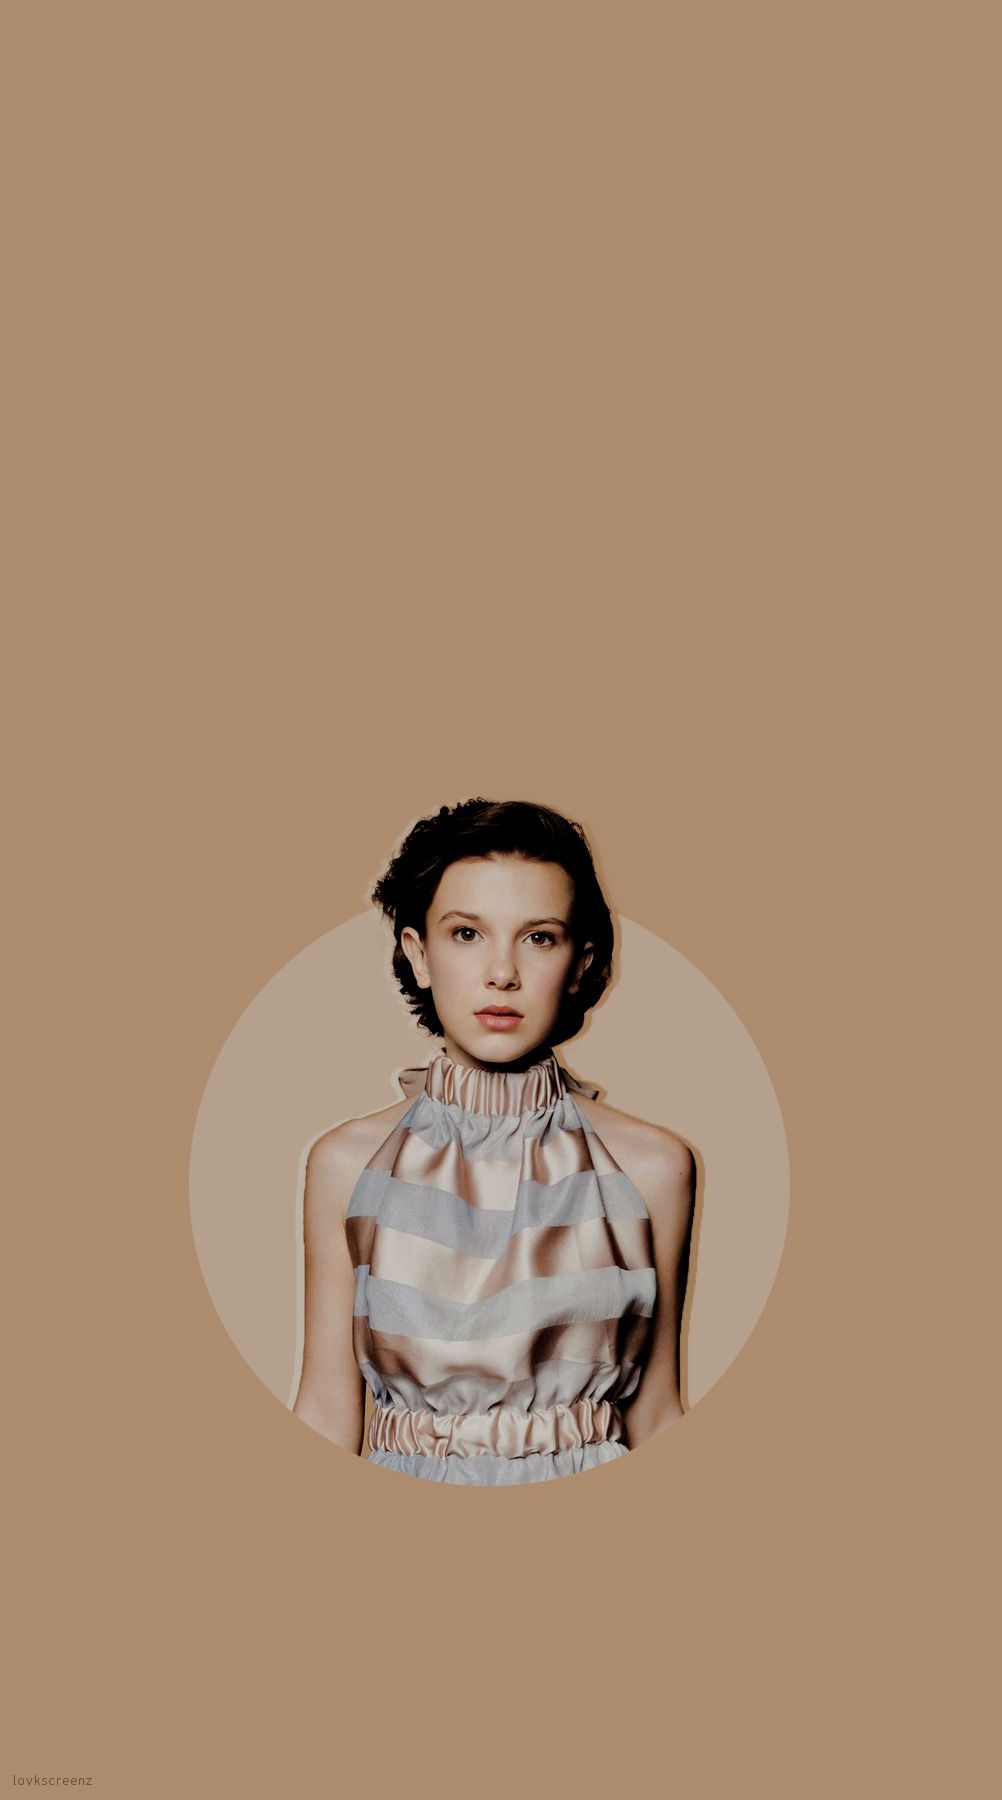 Millie Bobby Brown 2017 Wallpapers